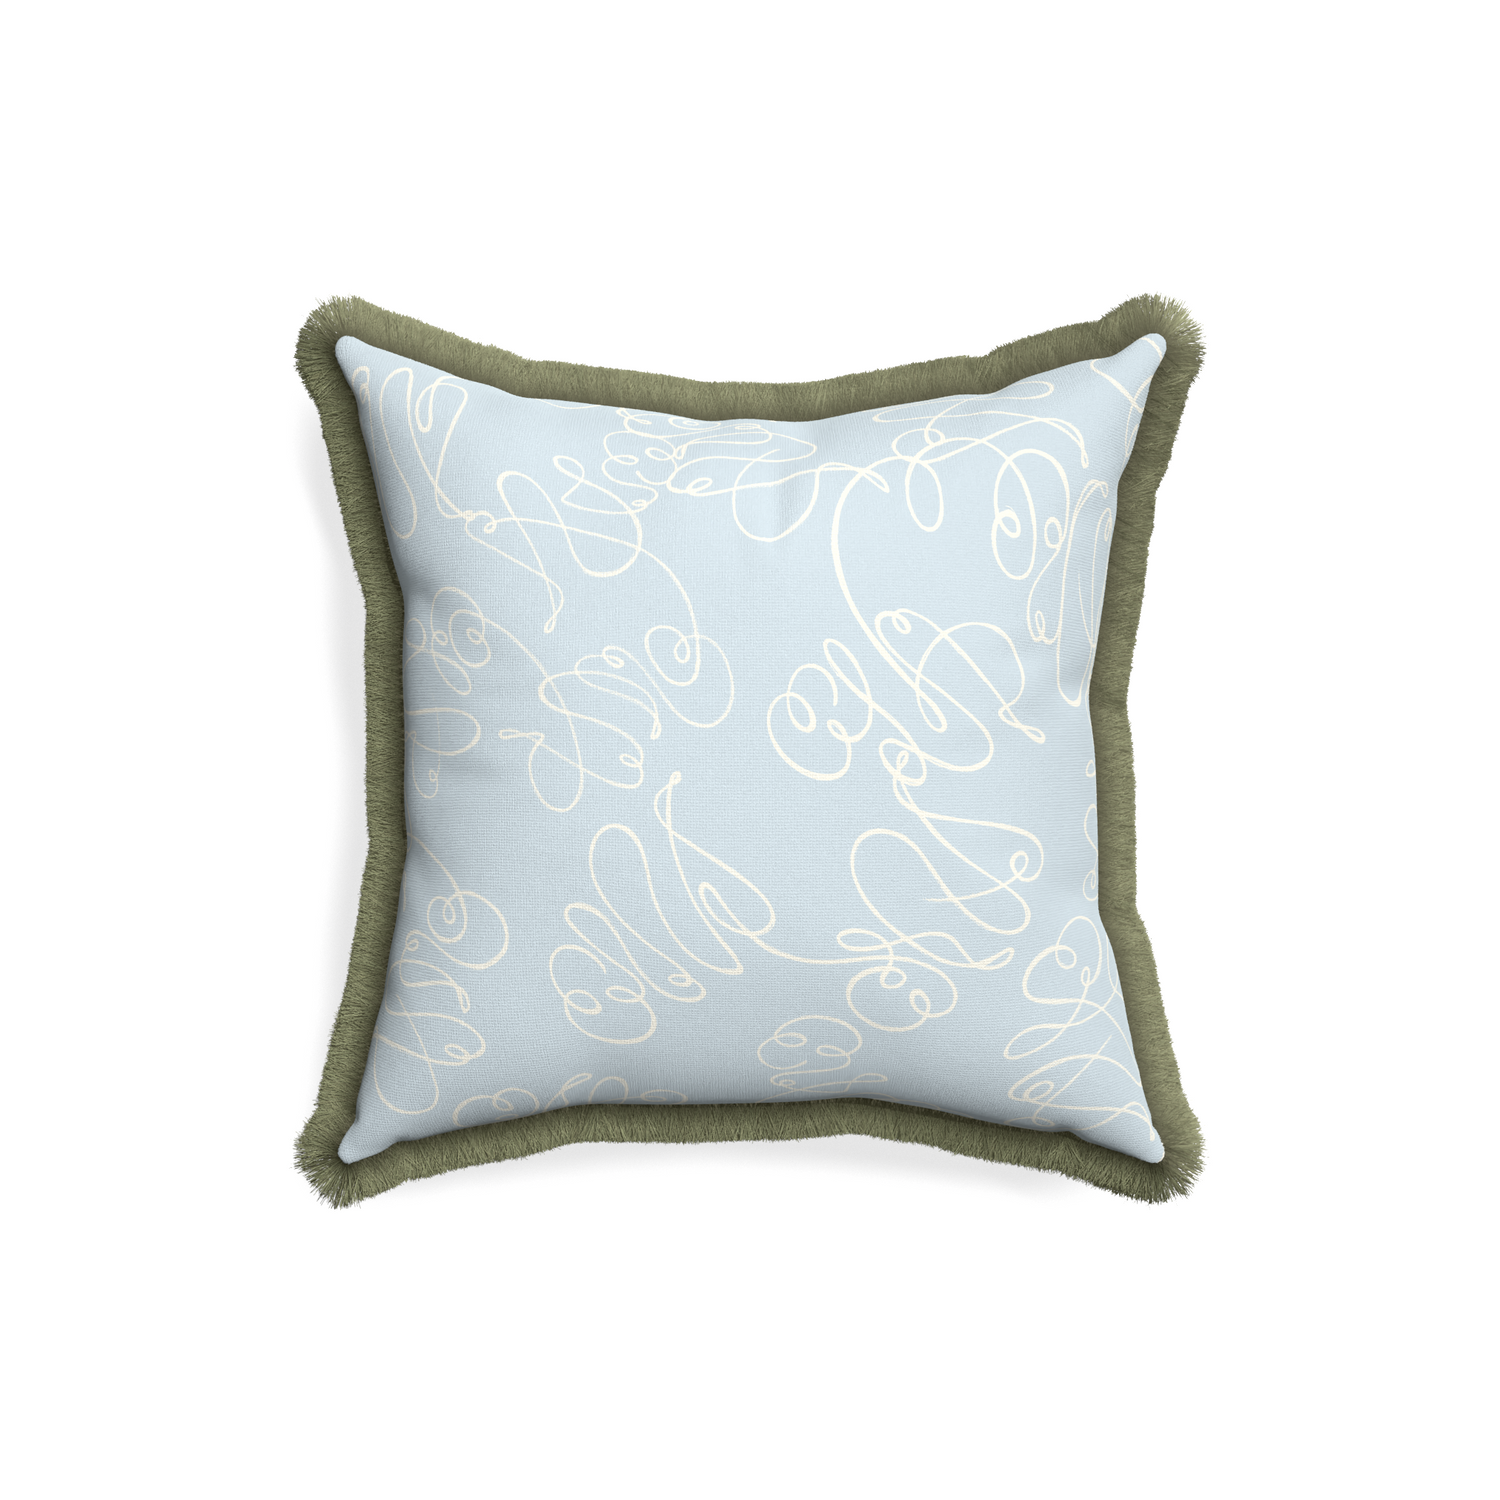 18-square mirabella custom pillow with sage fringe on white background